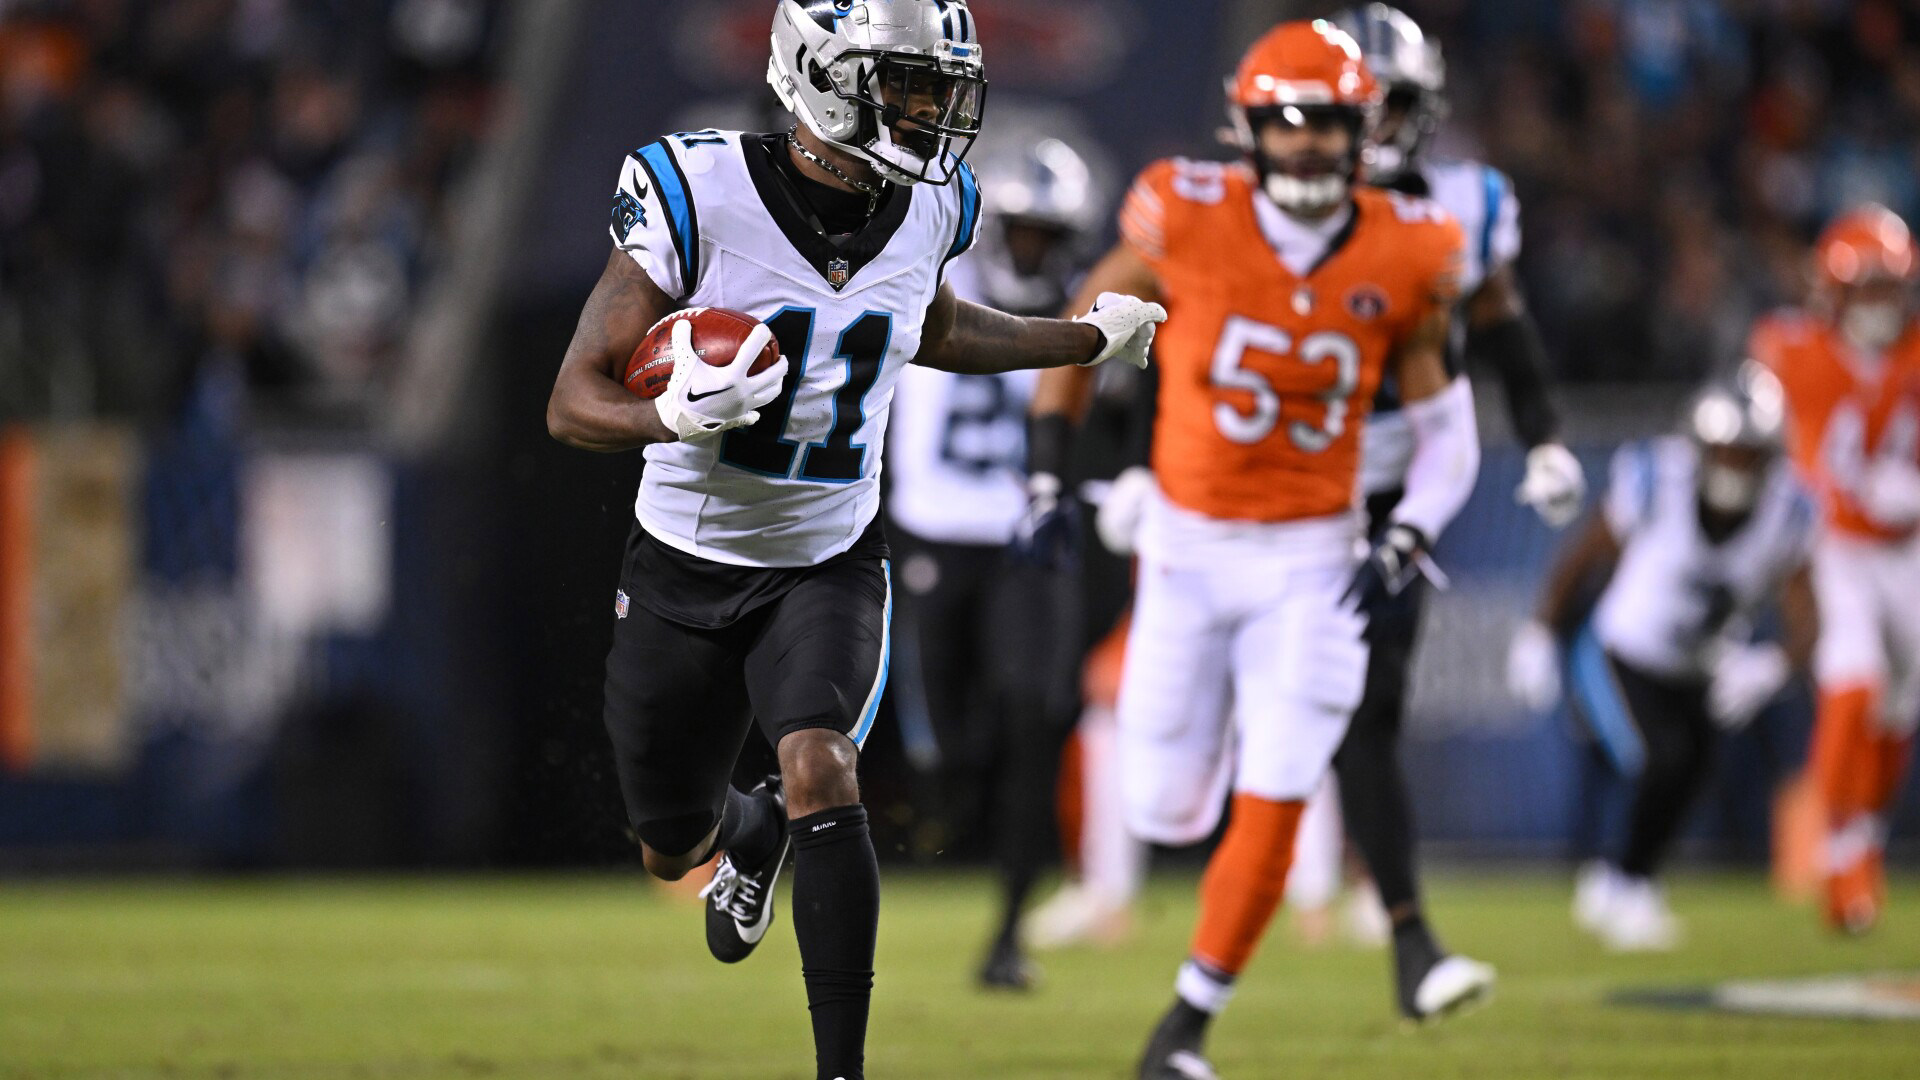 Ihmir Smith-Marsette's 79-yard punt return gives Panthers early lead